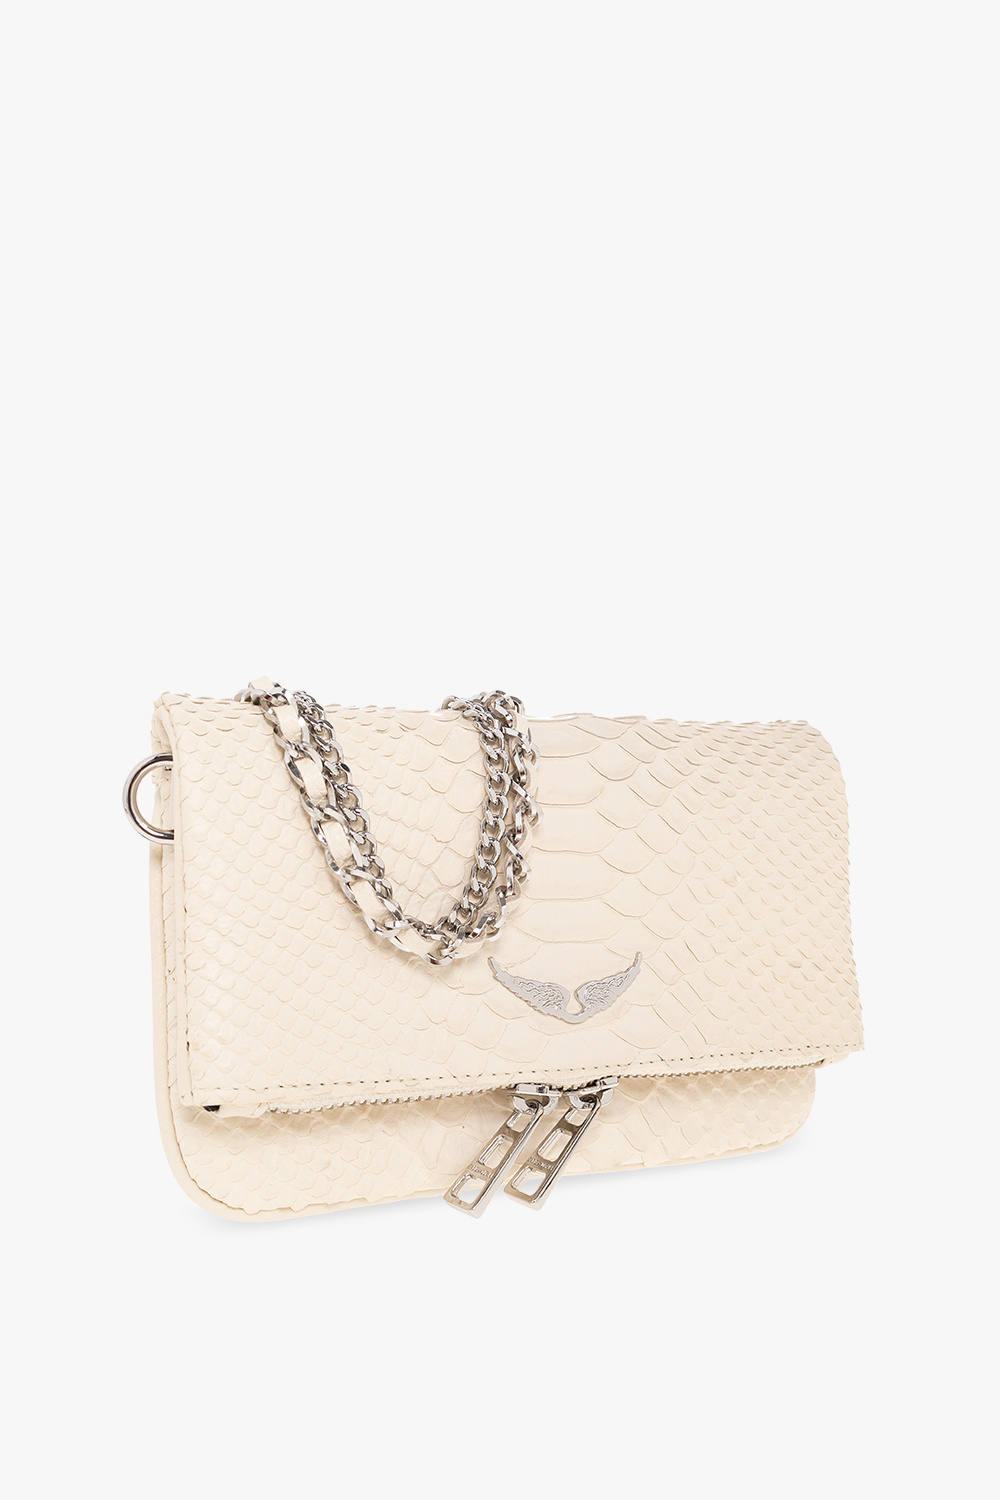 Zadig & Voltaire Rock Nano Savage Embossed Leather Clutch